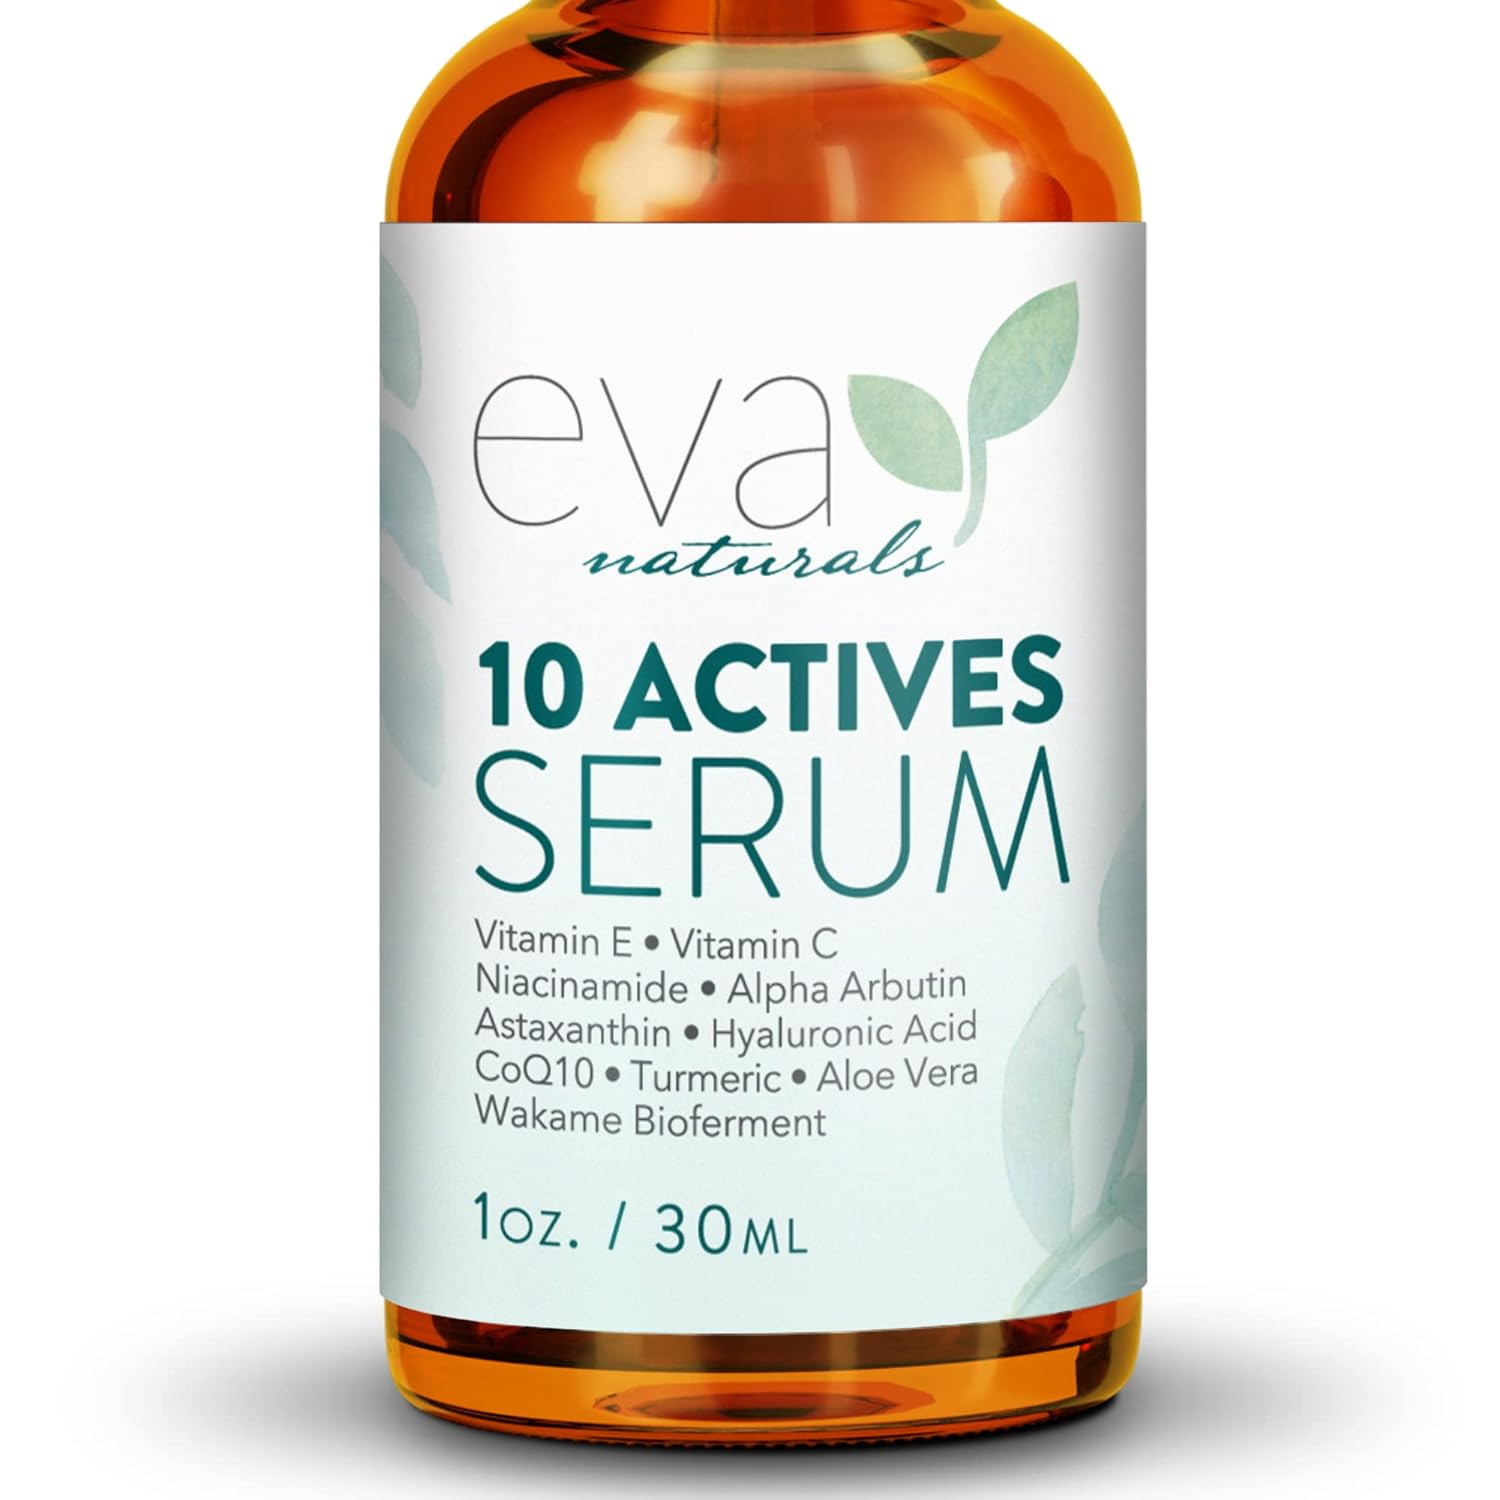 10 Actives Facial Serum (1oz) - Radiance & Tone Enhancing Complex - With Niacinamide, Vitamin C, and Hyaluronic Acid - Hydrating and Brightening Serum for All Skin Types